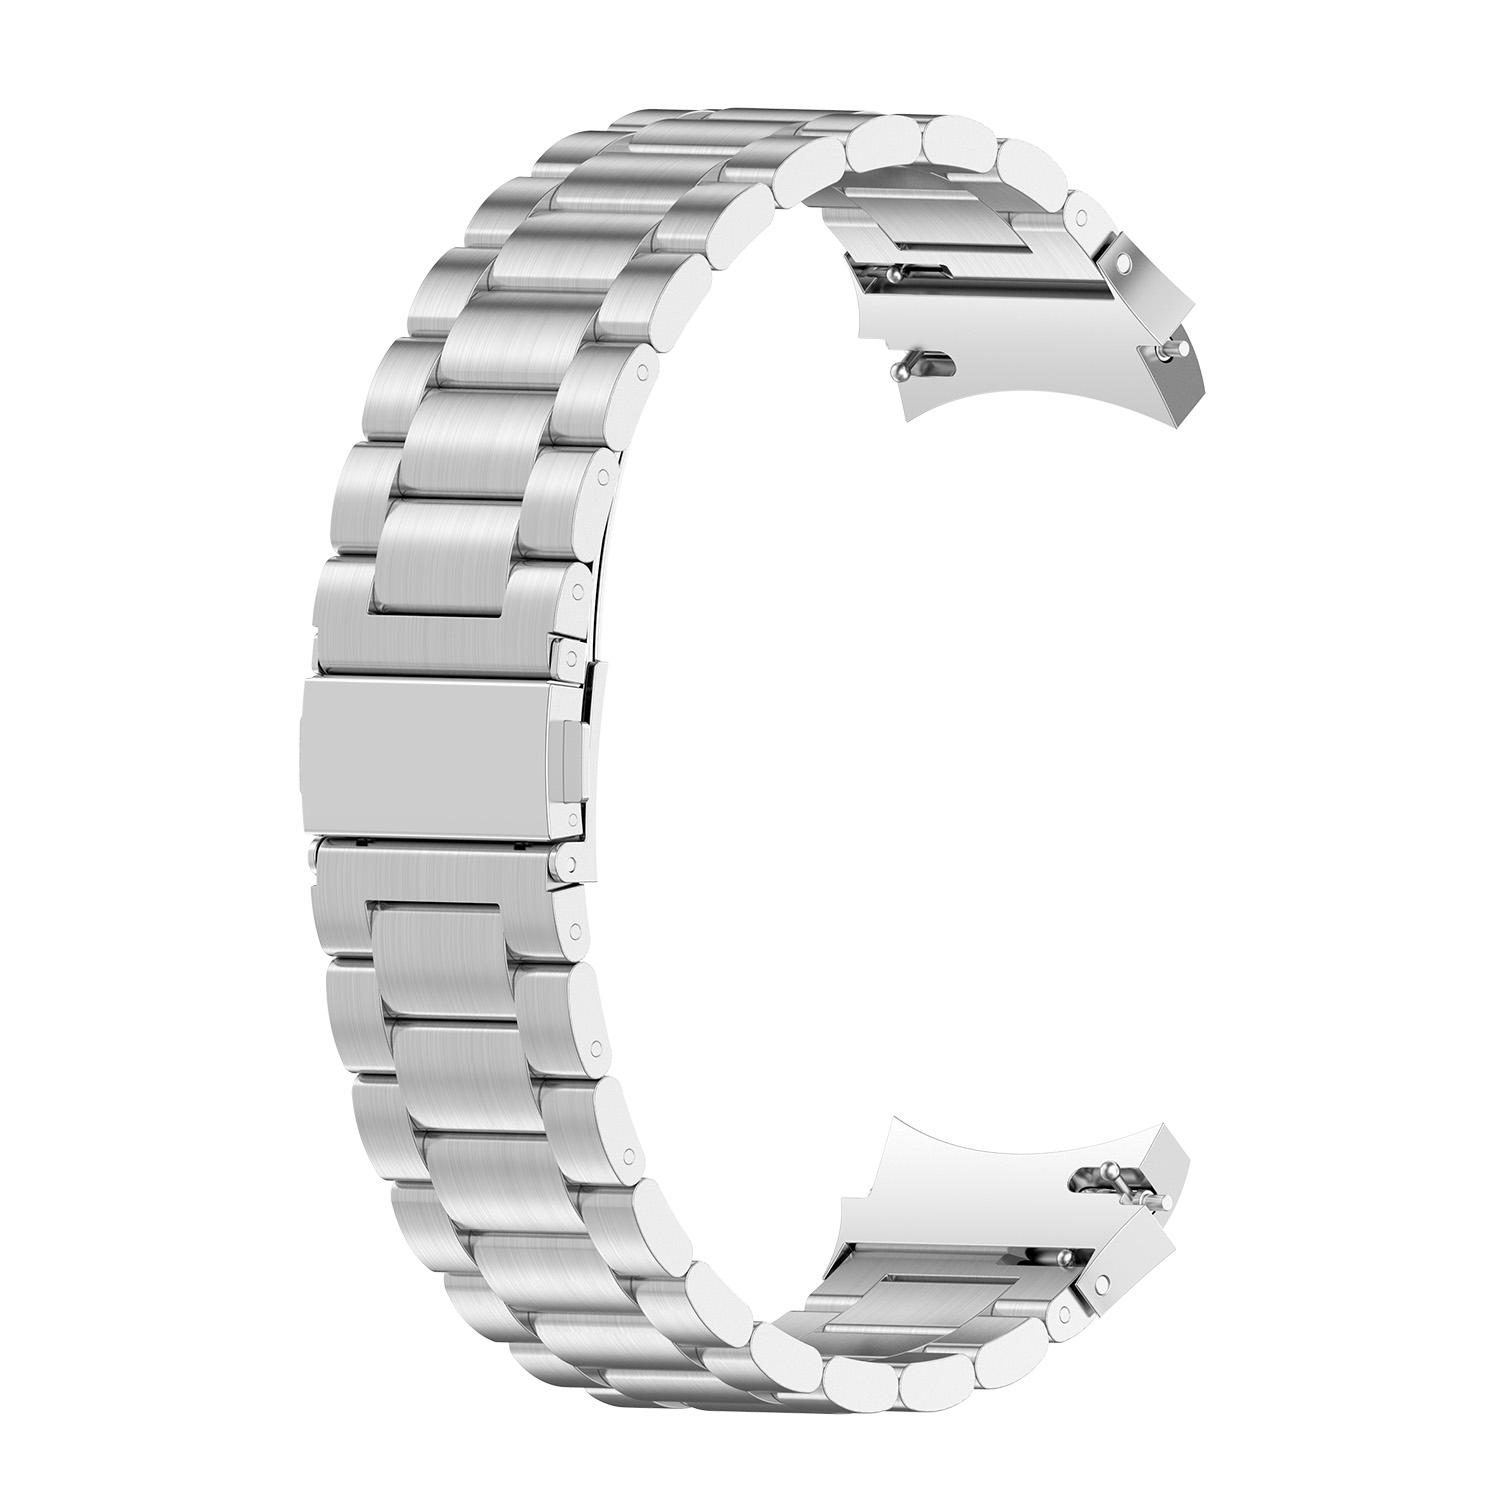 Bakeey-20mm-Universal-Stainless-Steel-Watch-Band-Strap-Replacement-for-Samsung-Galaxy-Watch-4-40MM44-1891327-10